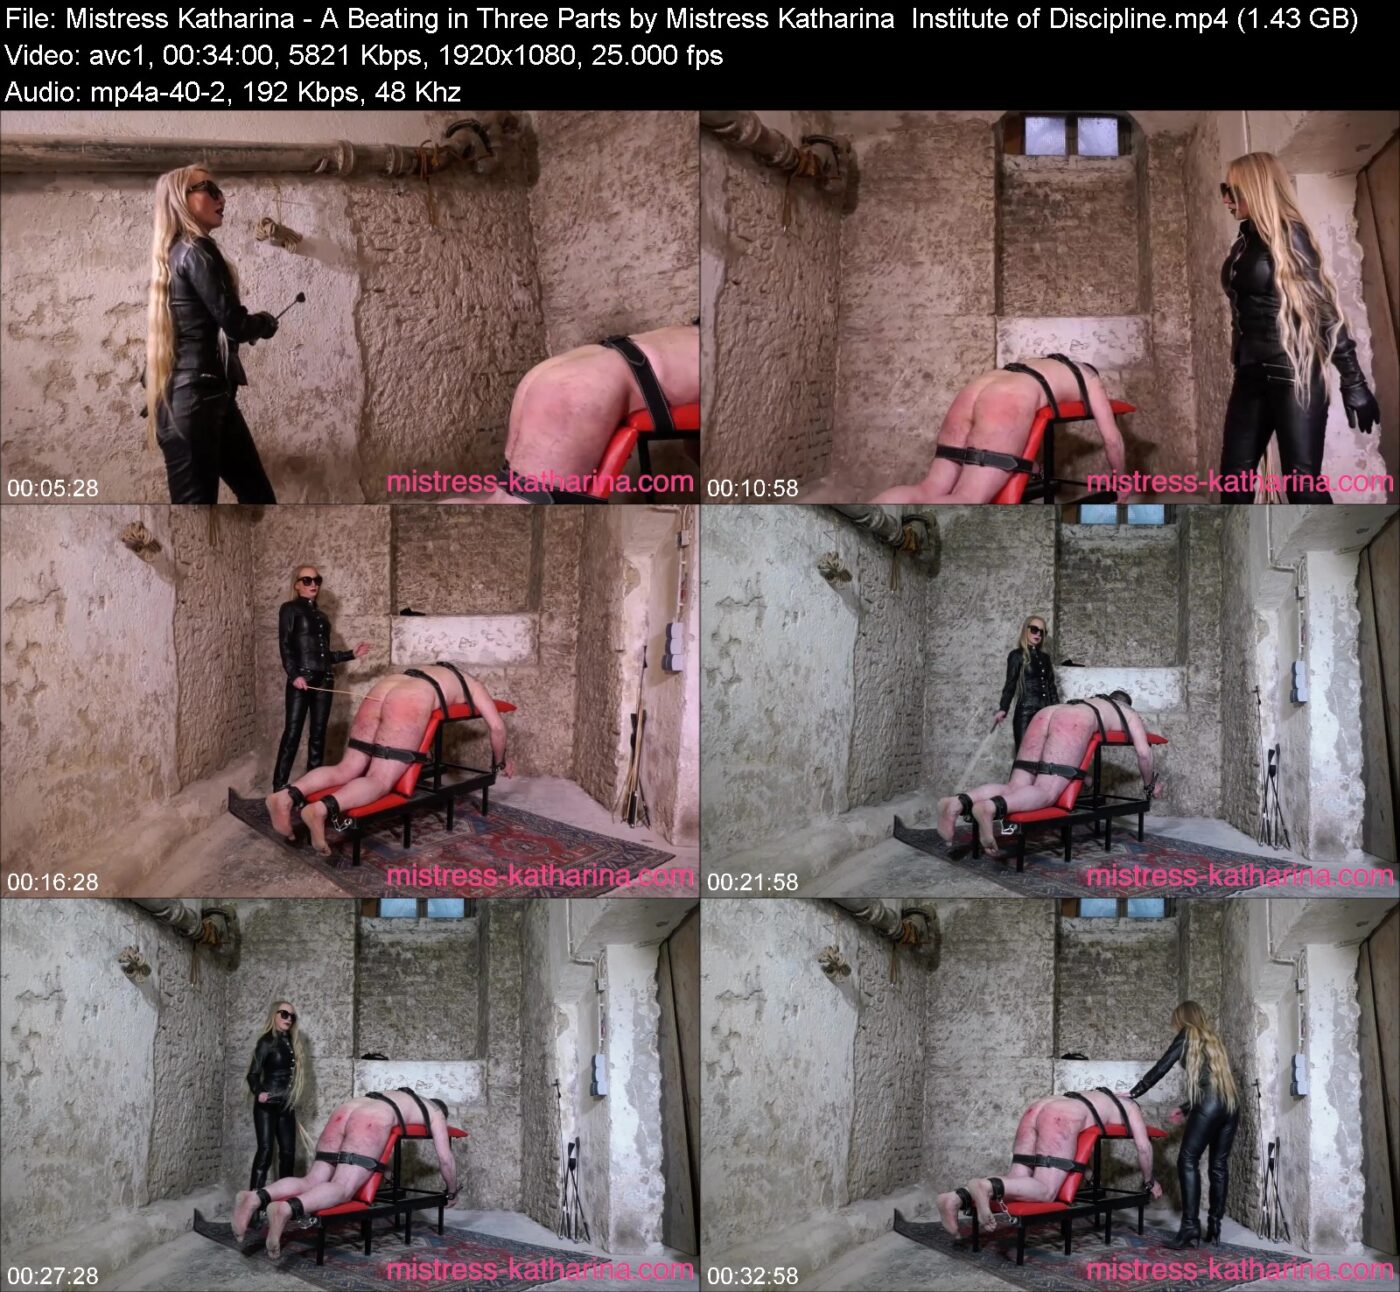 Mistress Katharina in A Beating in Three Parts by Mistress Katharina  Institute of Discipline